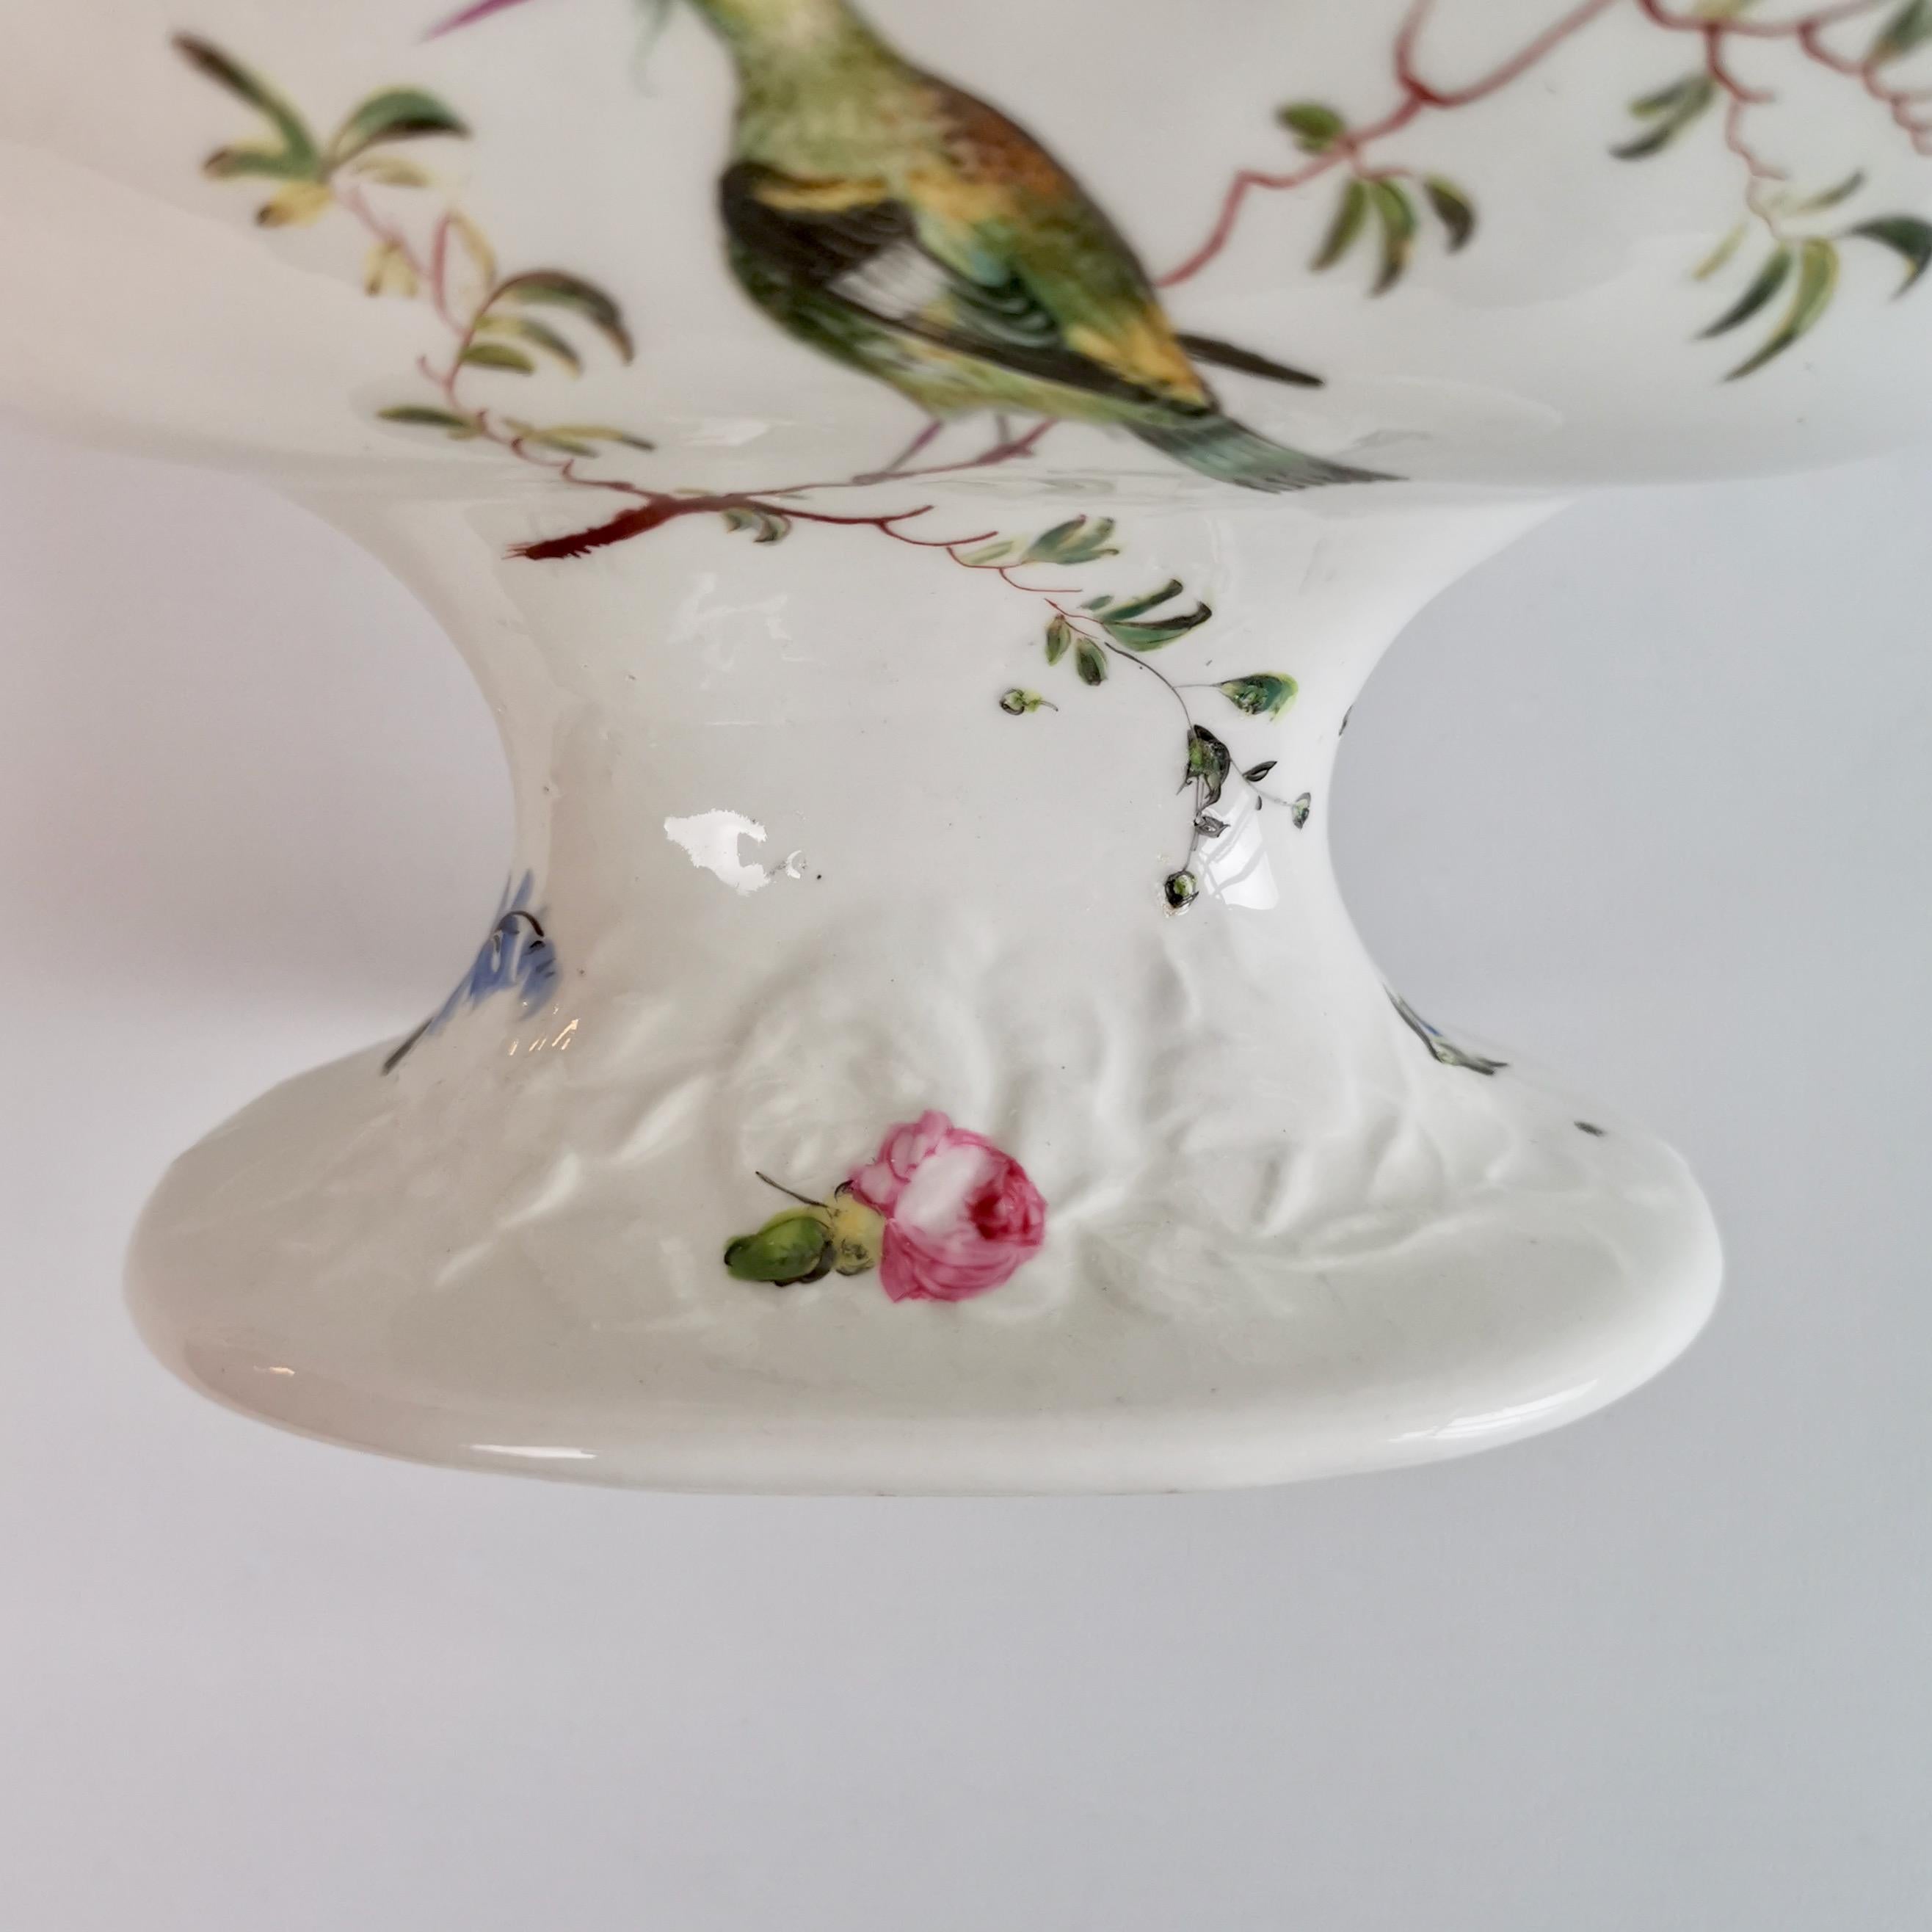 Mayer & Newbold Porcelain Comport, White with Exotic Birds, Regency, ca 1820 6